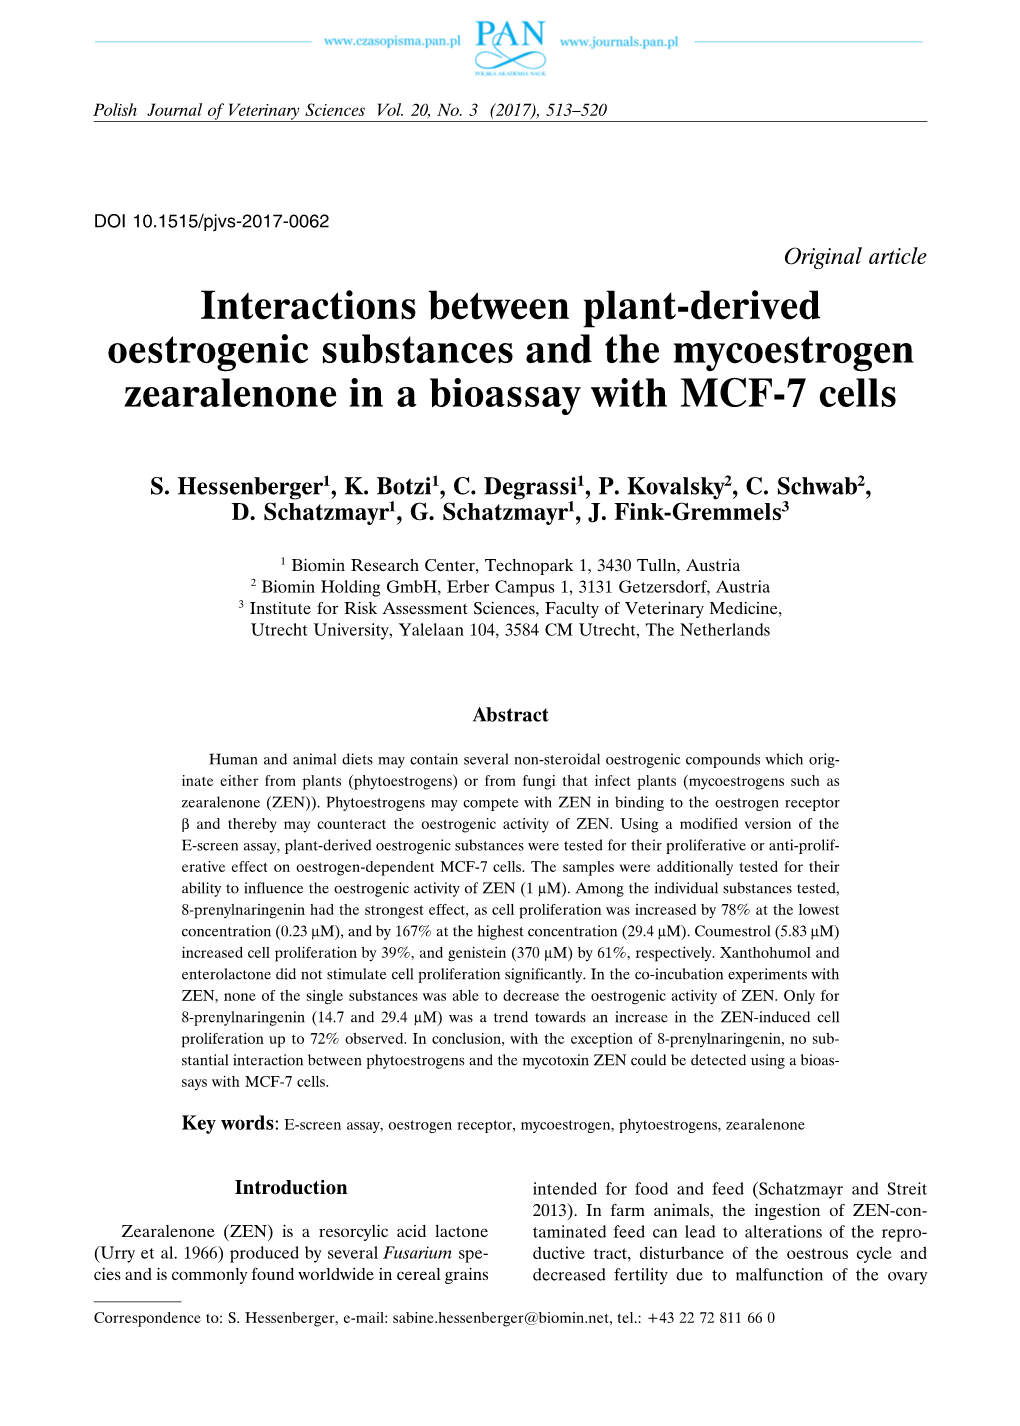 Interactions Between Plant-Derived Oestrogenic Substances and the Mycoestrogen Zearalenone in a Bioassay with MCF-7 Cells